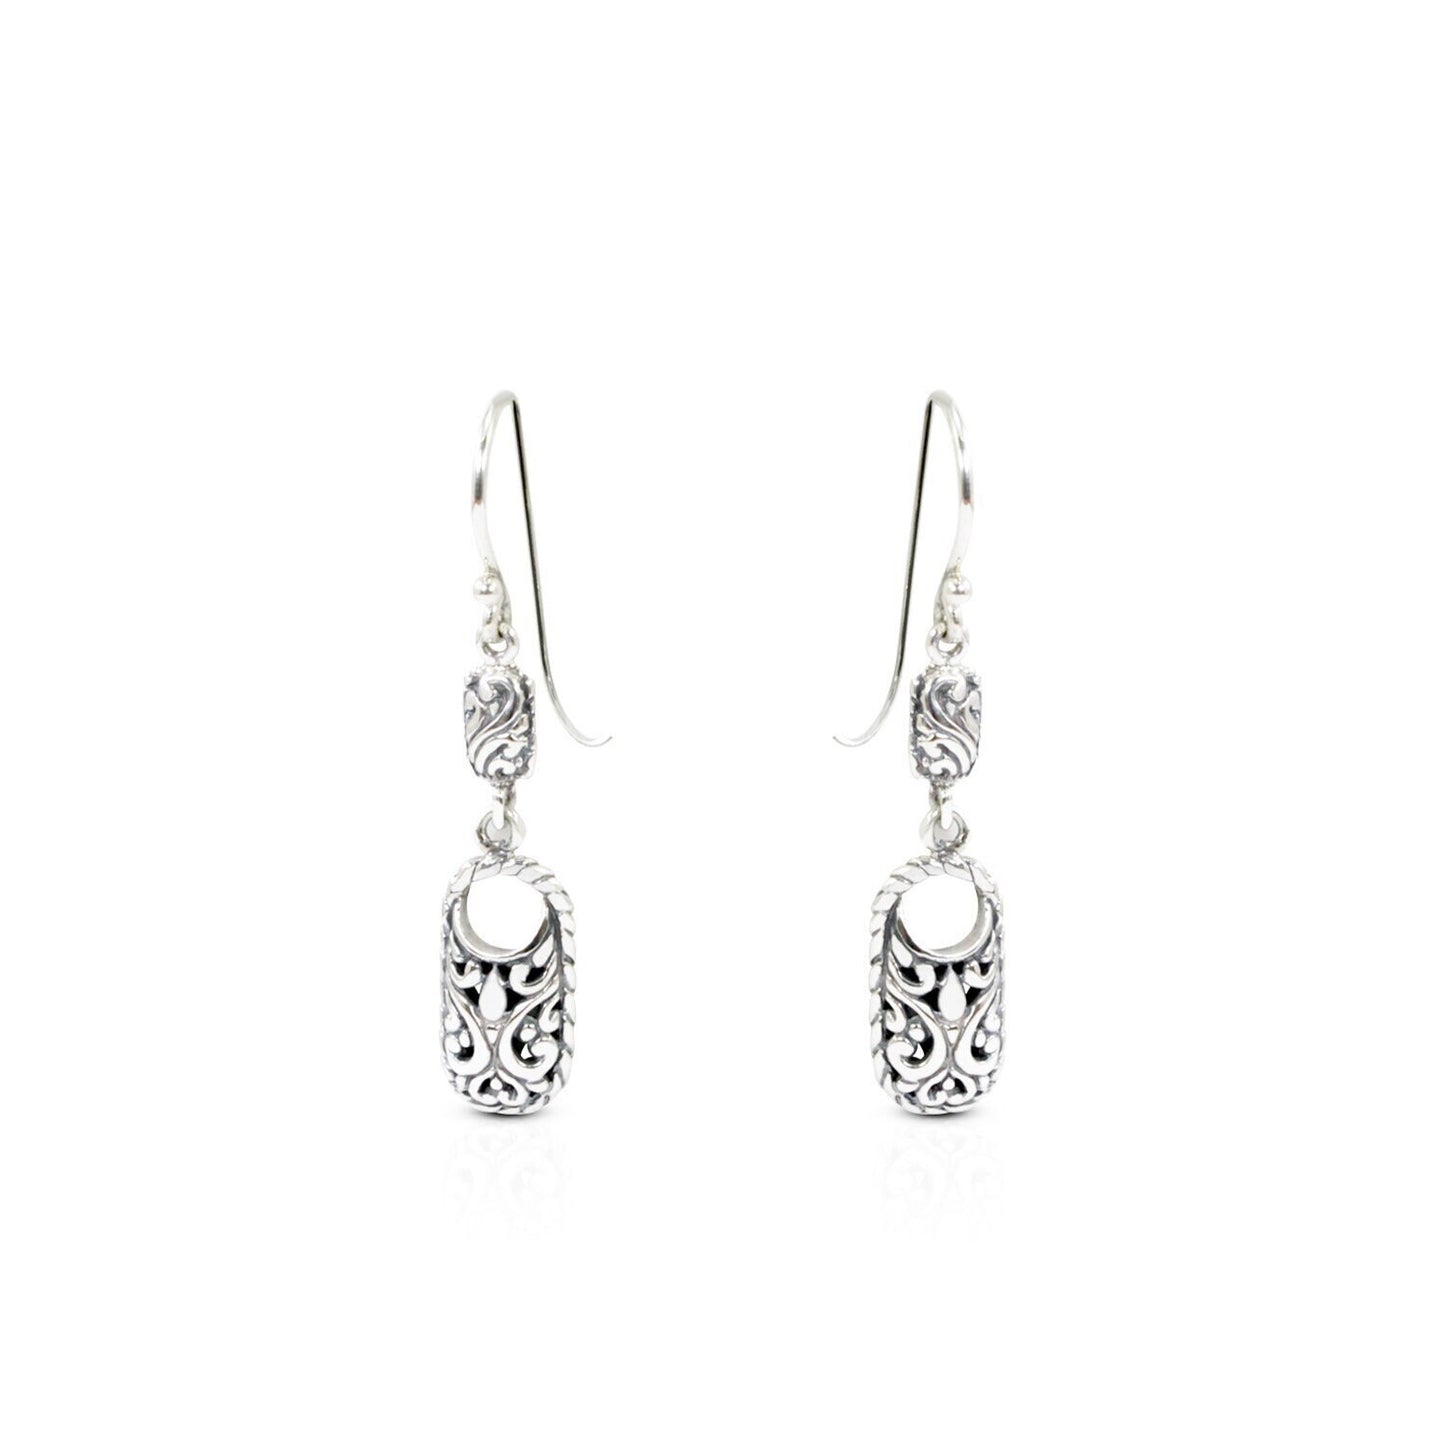 925 sterling silver earrings decorated with swirl filigree